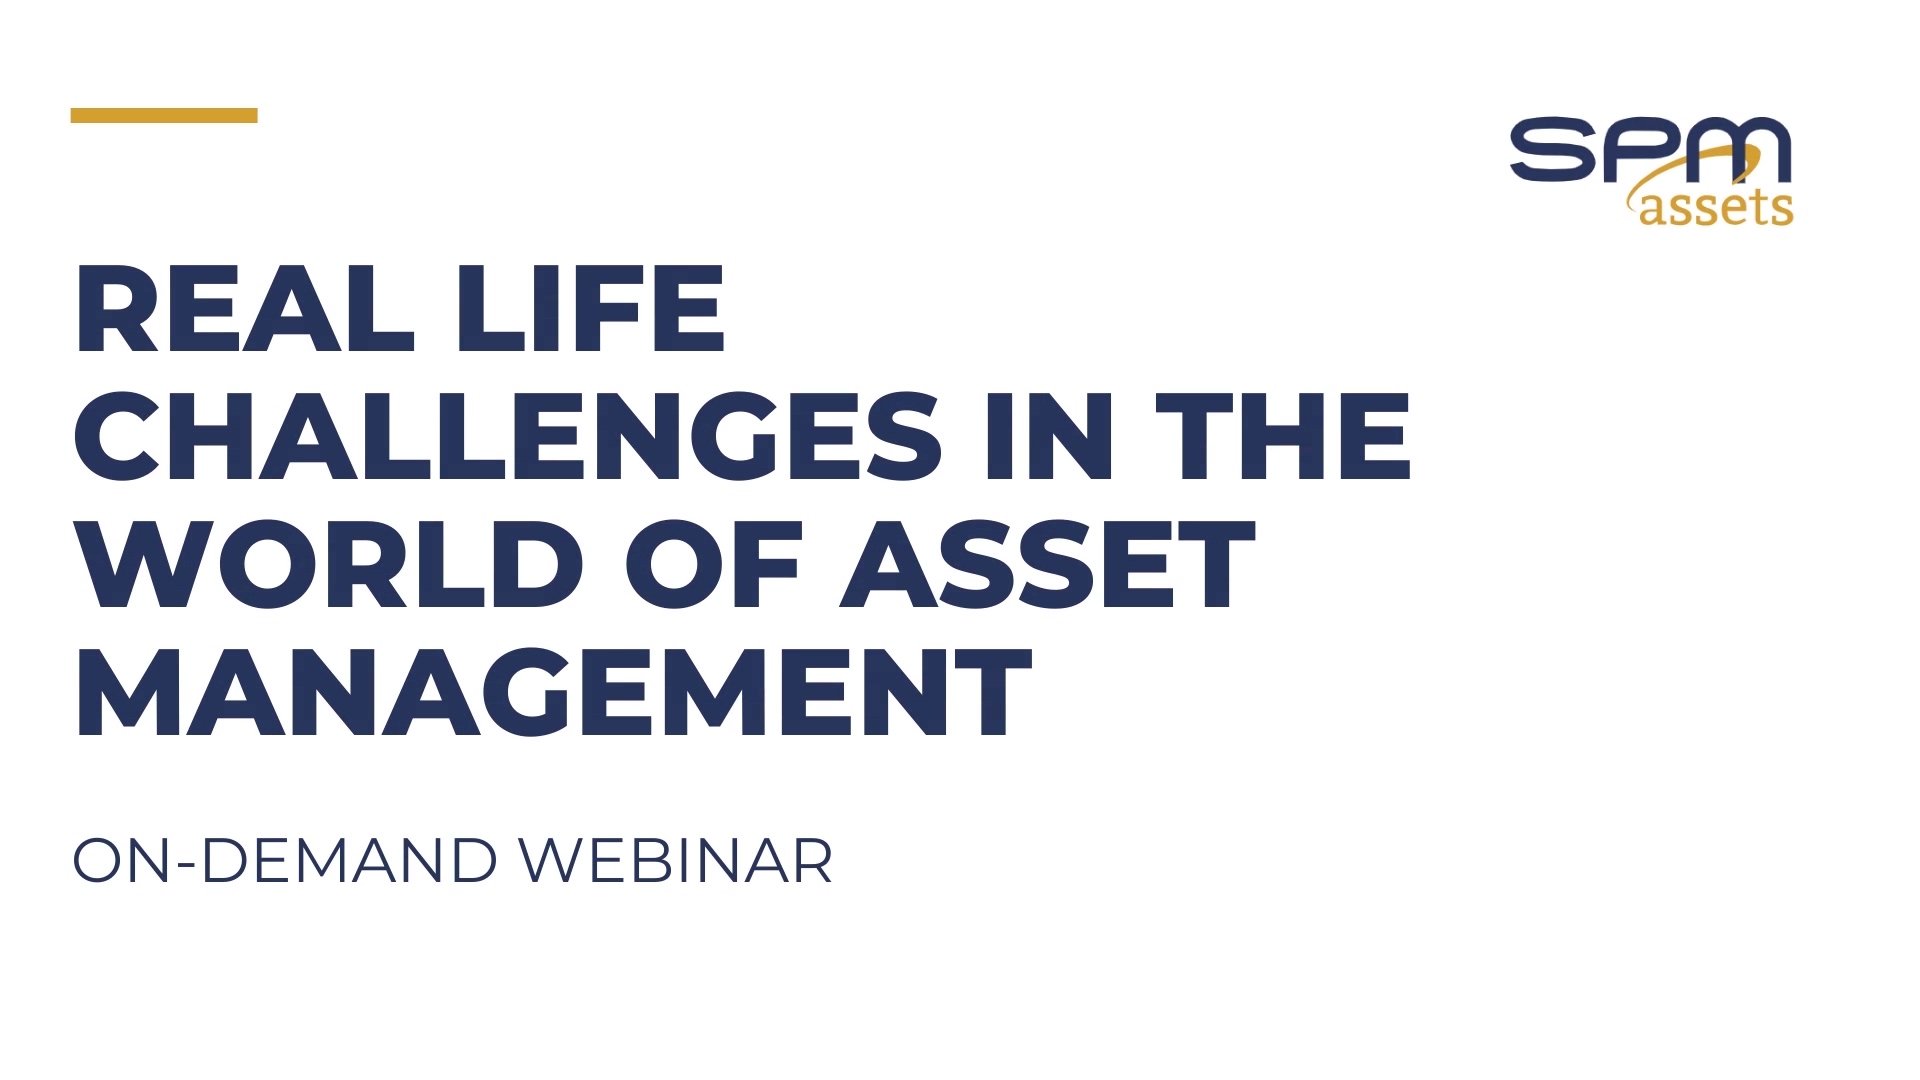 odw-real-life-challenges-in-asset-management-thumb